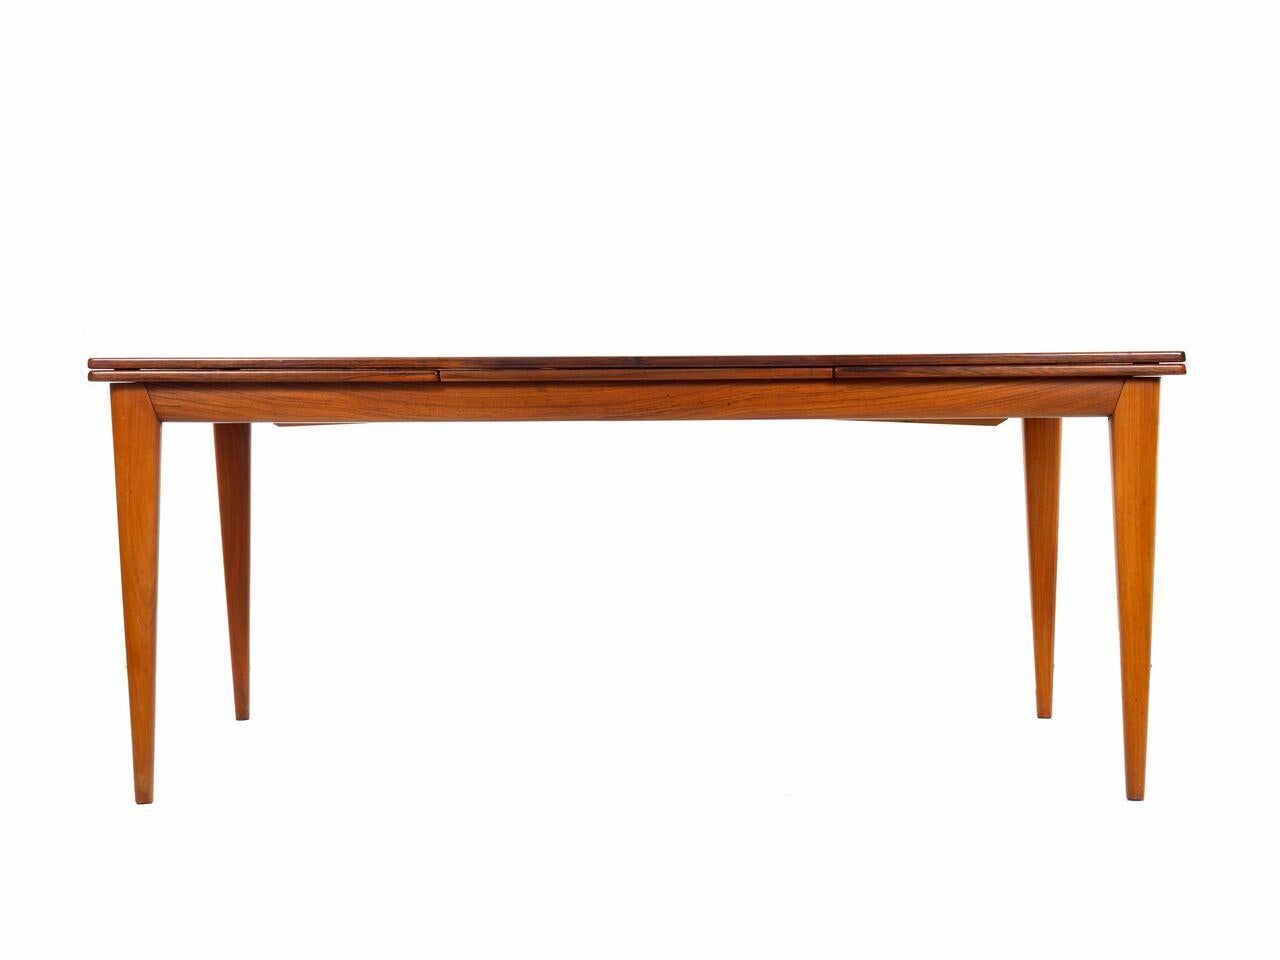 Danish Mid-Century Modern Rosewood Dining Table by Niels Møller, Model No. 254 1